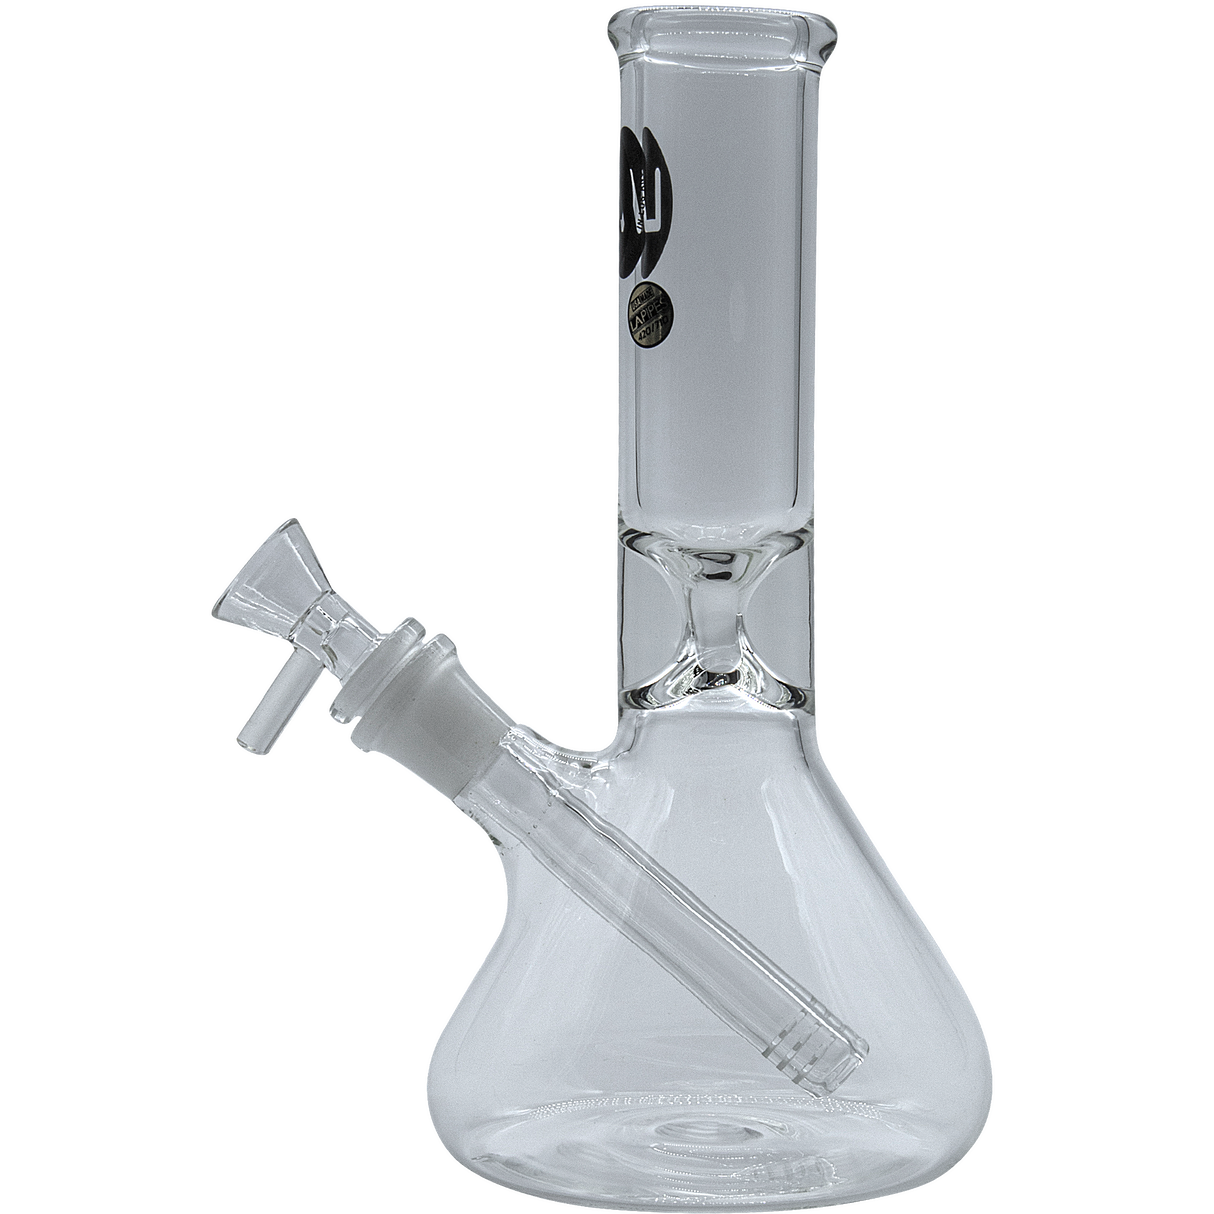 LA Pipes "Shortstop" Beaker Bong, clear borosilicate glass, 10" height, 14mm female joint, side view